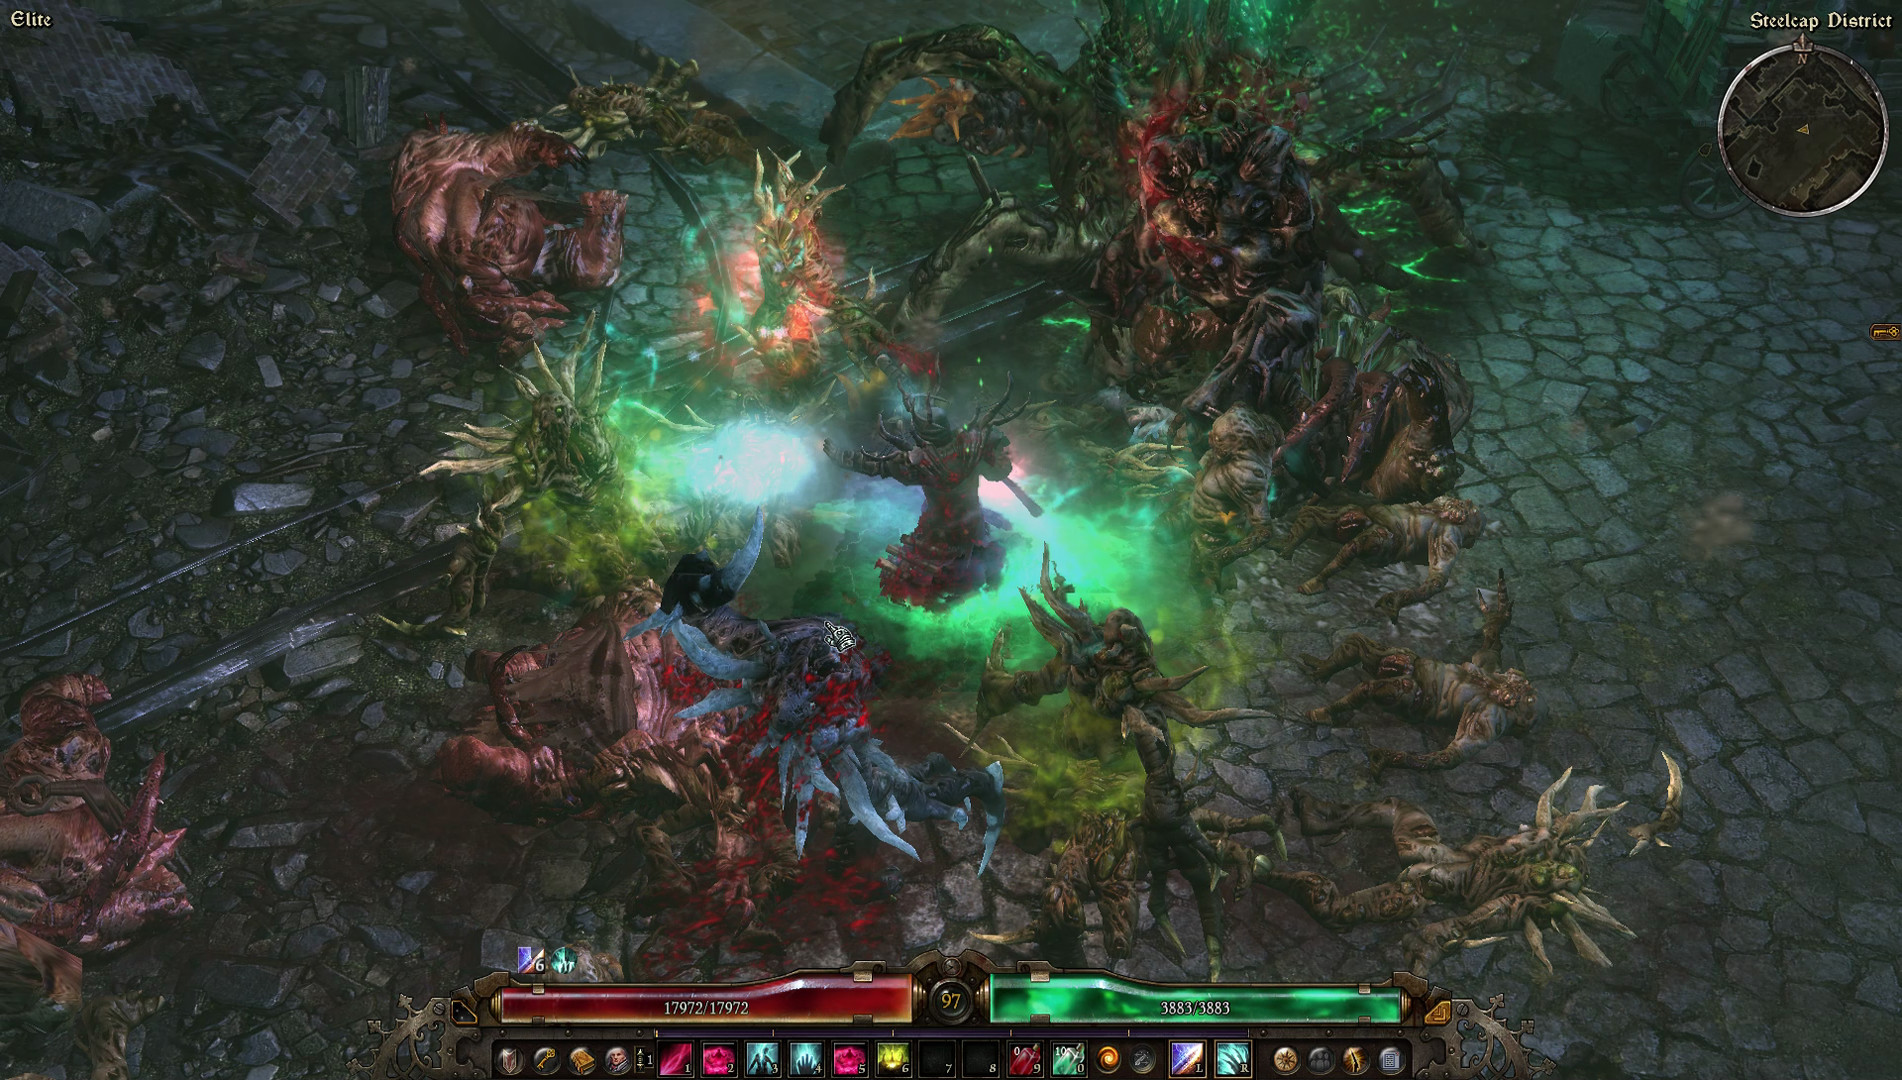 Grim Dawn – Ashes of Malmouth Free Download Torrent